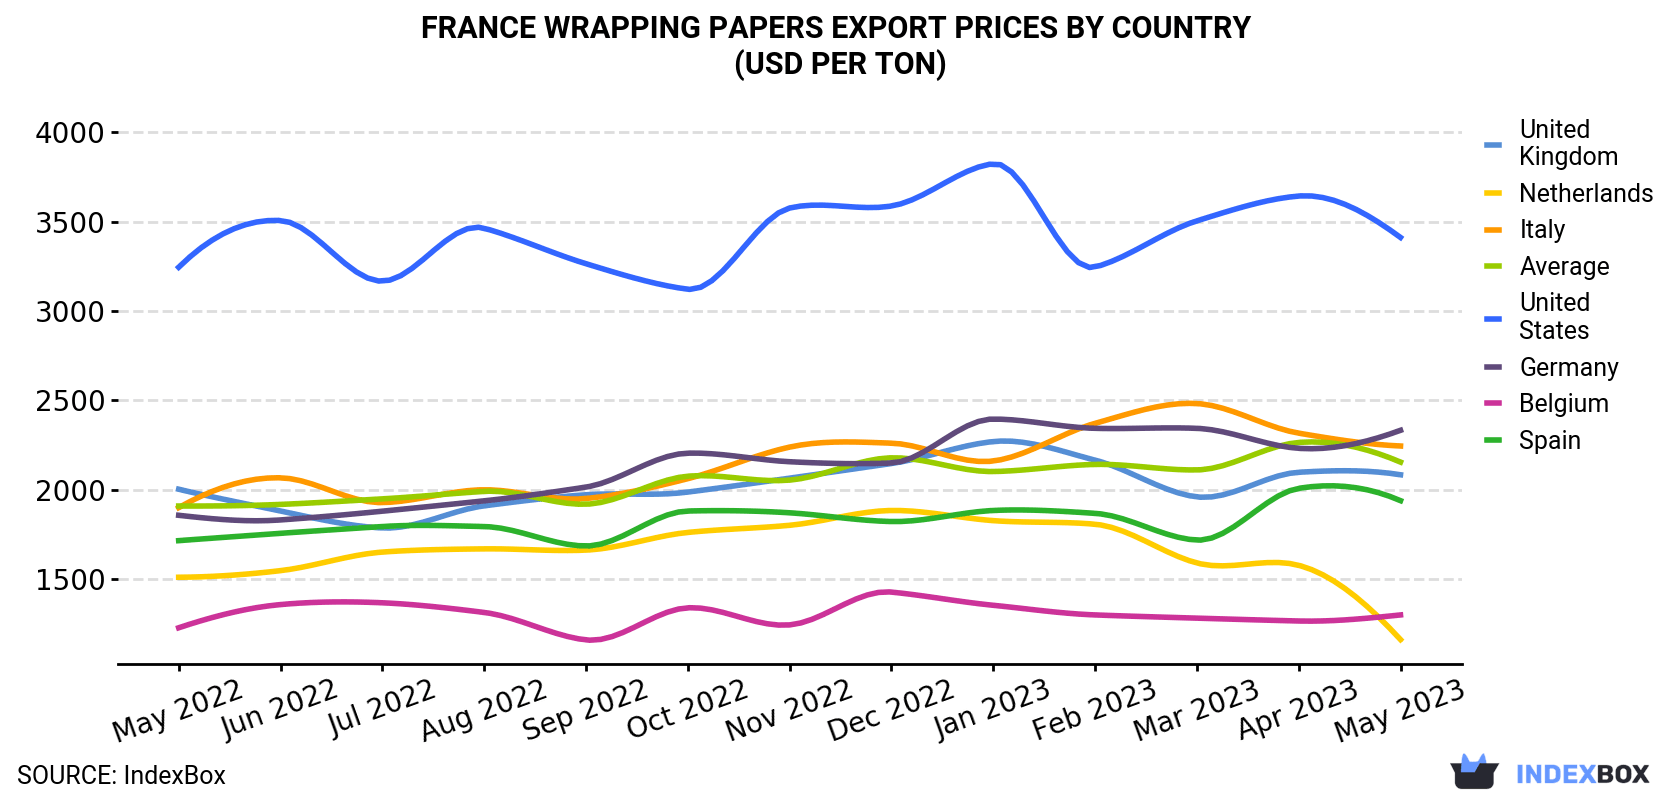 France Wrapping Papers Export Prices By Country (USD Per Ton)